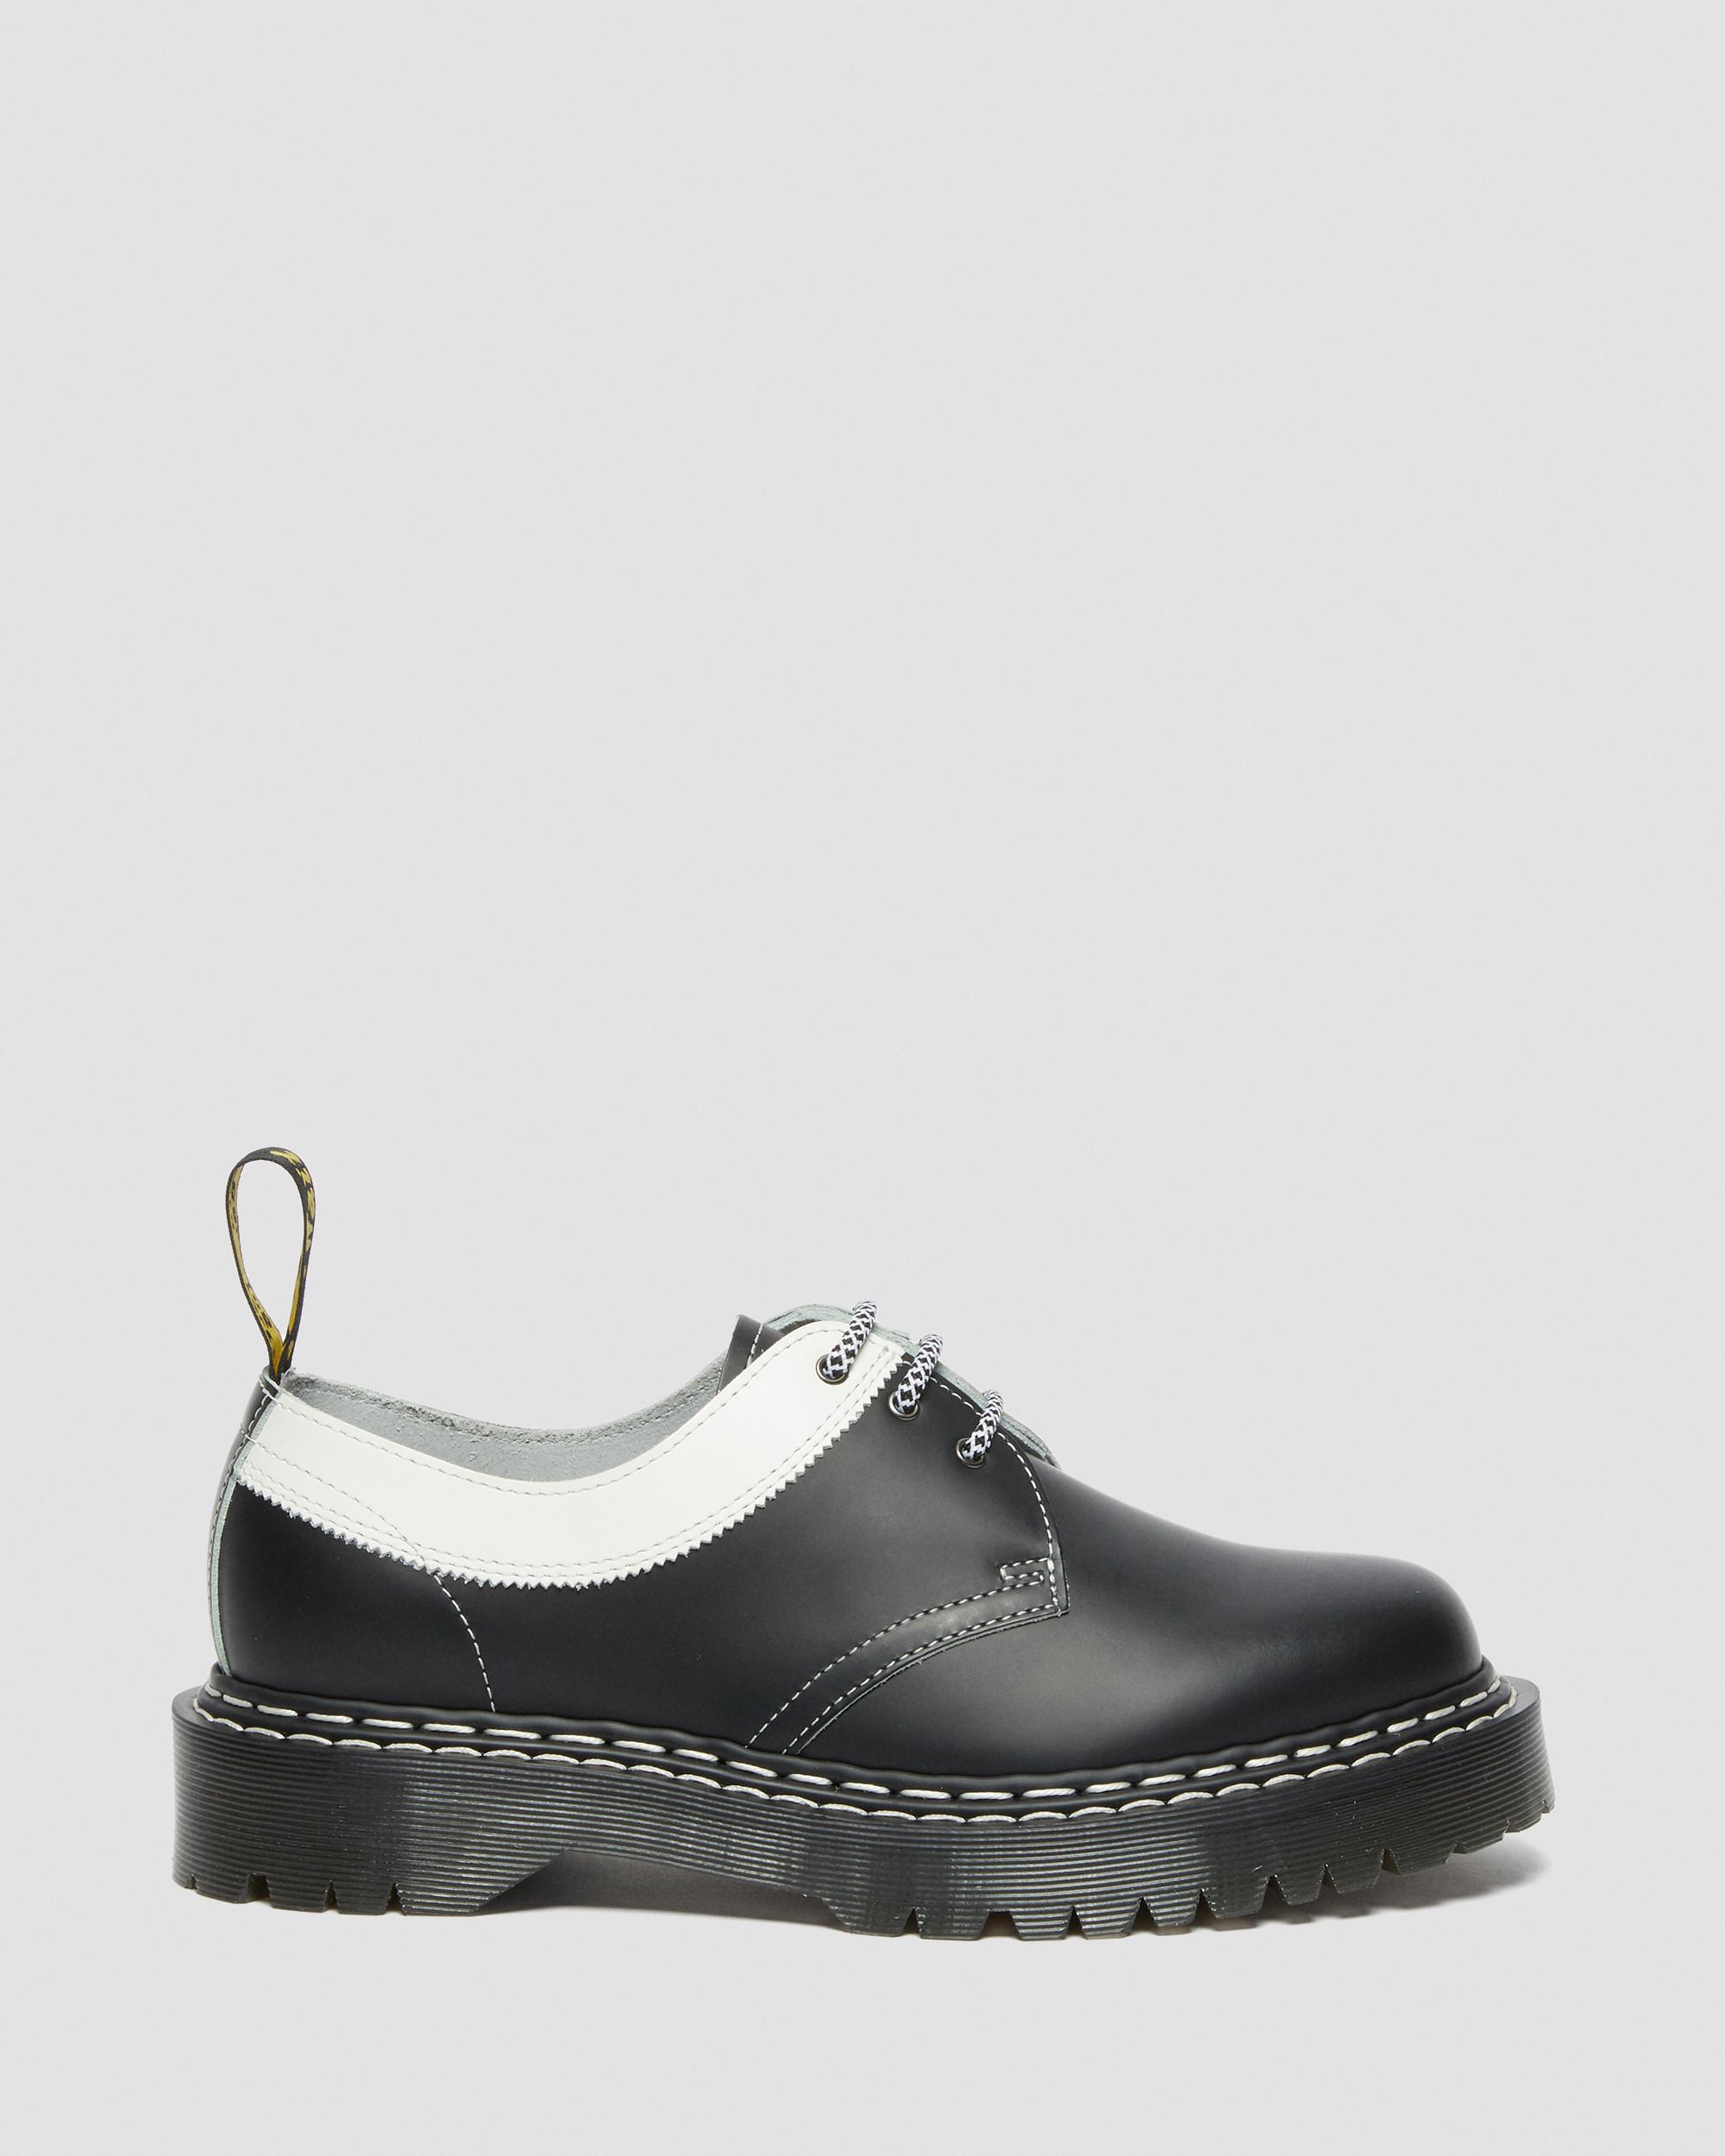 1461 Bex Smooth Contrast Leather Oxford Shoes, Black | Dr. Martens